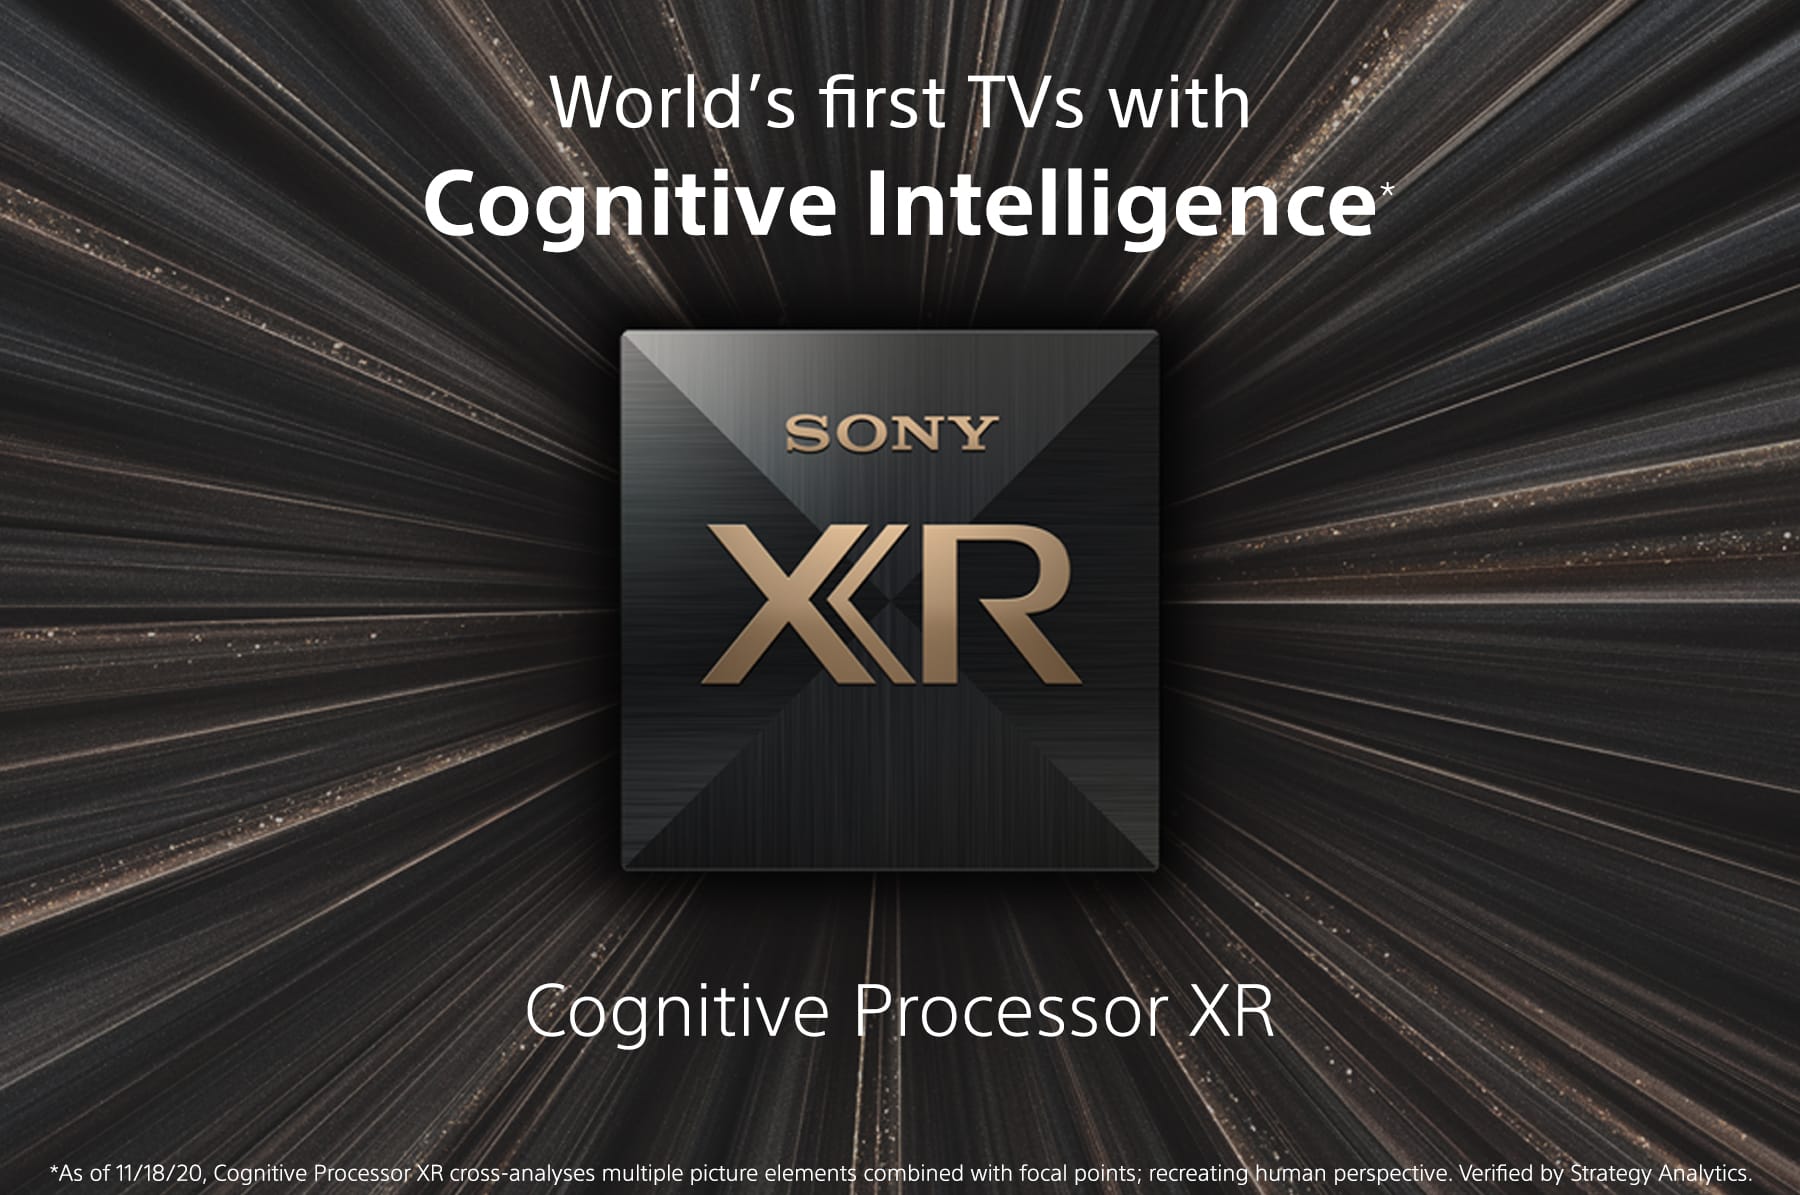 XR Cognitive Intelligence Proccessing